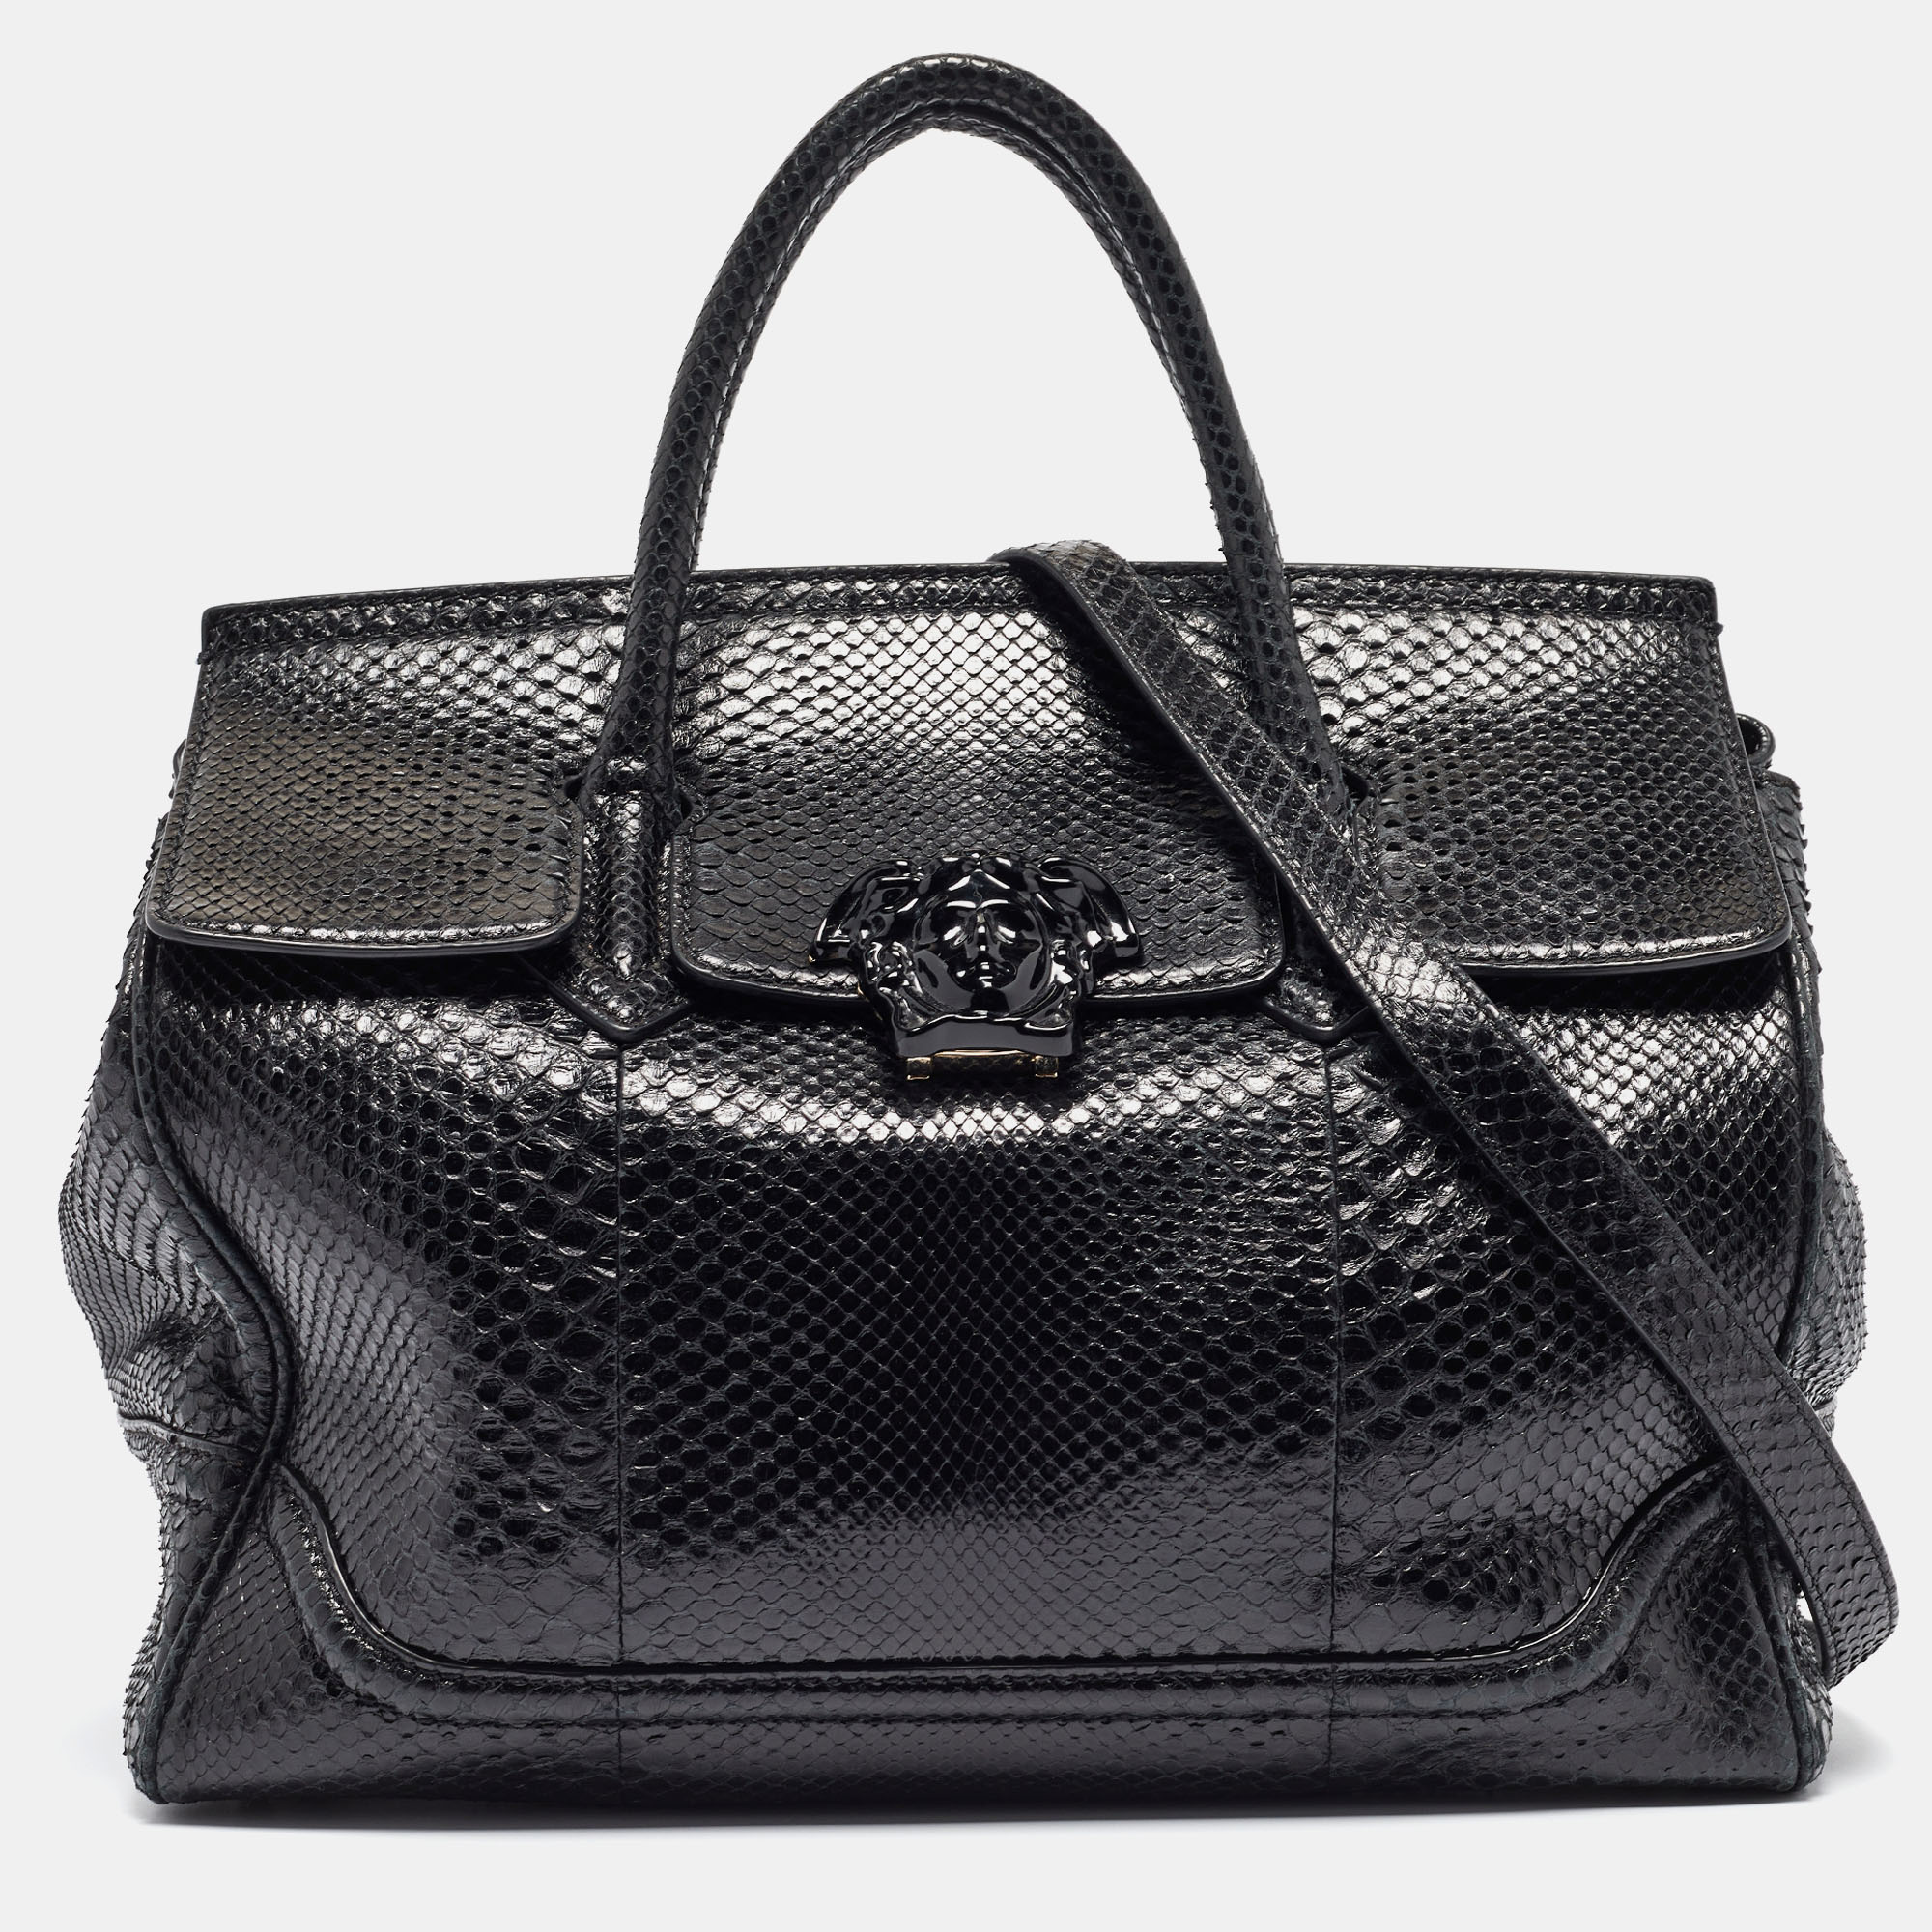 Versace black water snakeskin leather empire palazzo tote